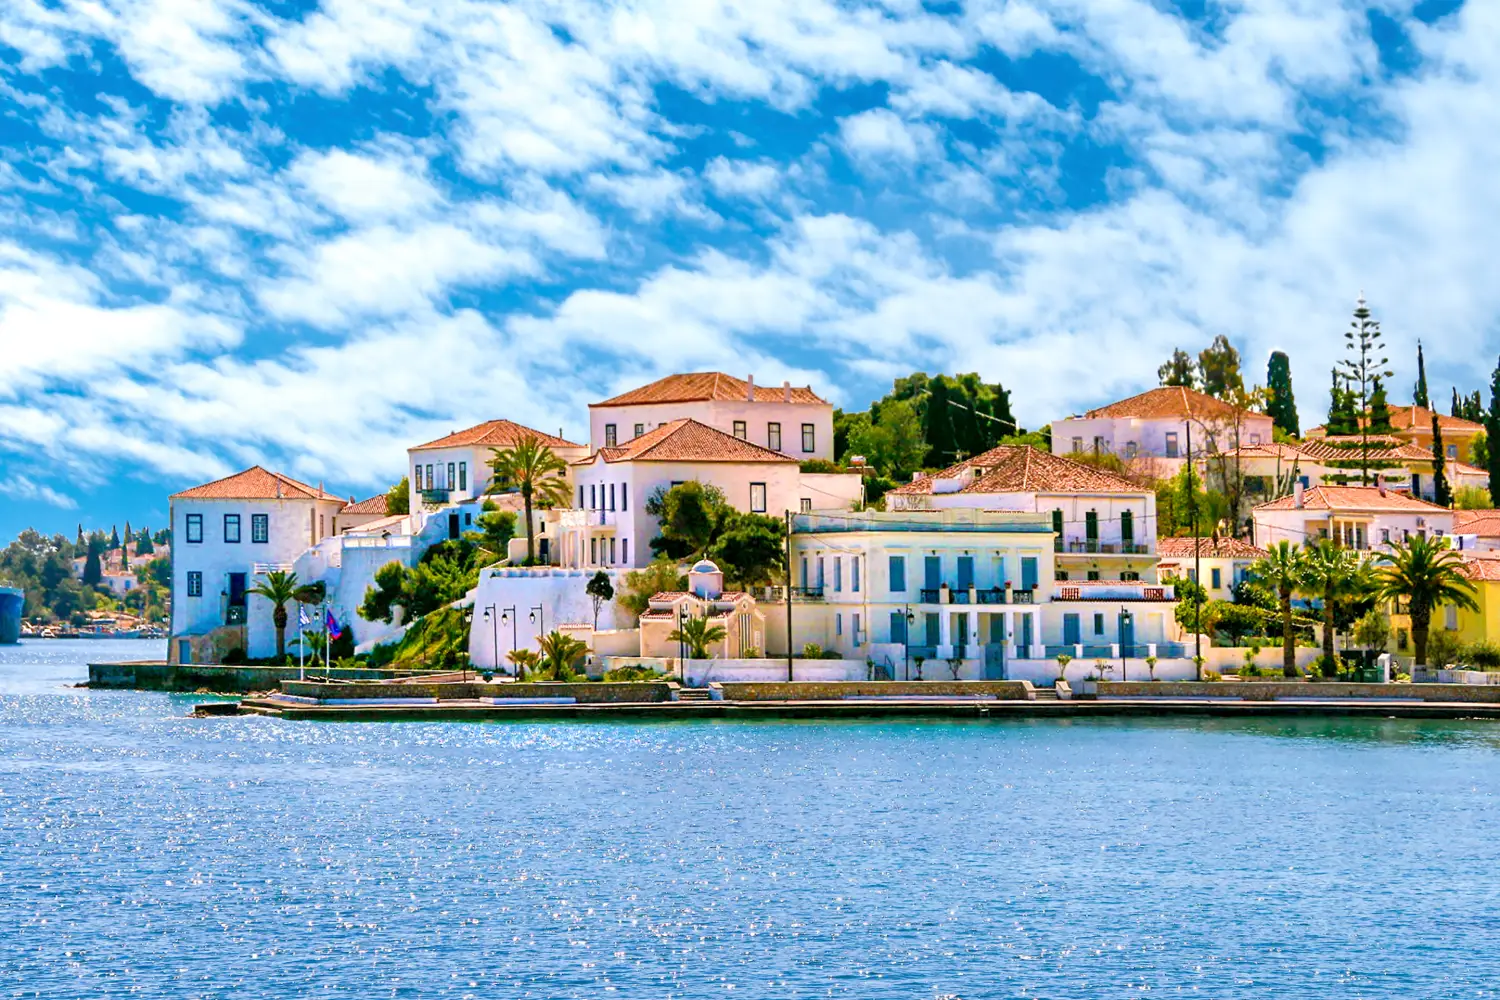 Ferry to Saronic Islands - Buildings of Spetses island on Saronic gulf near Athens. Ideal travel destination for quiet vacations, Greece